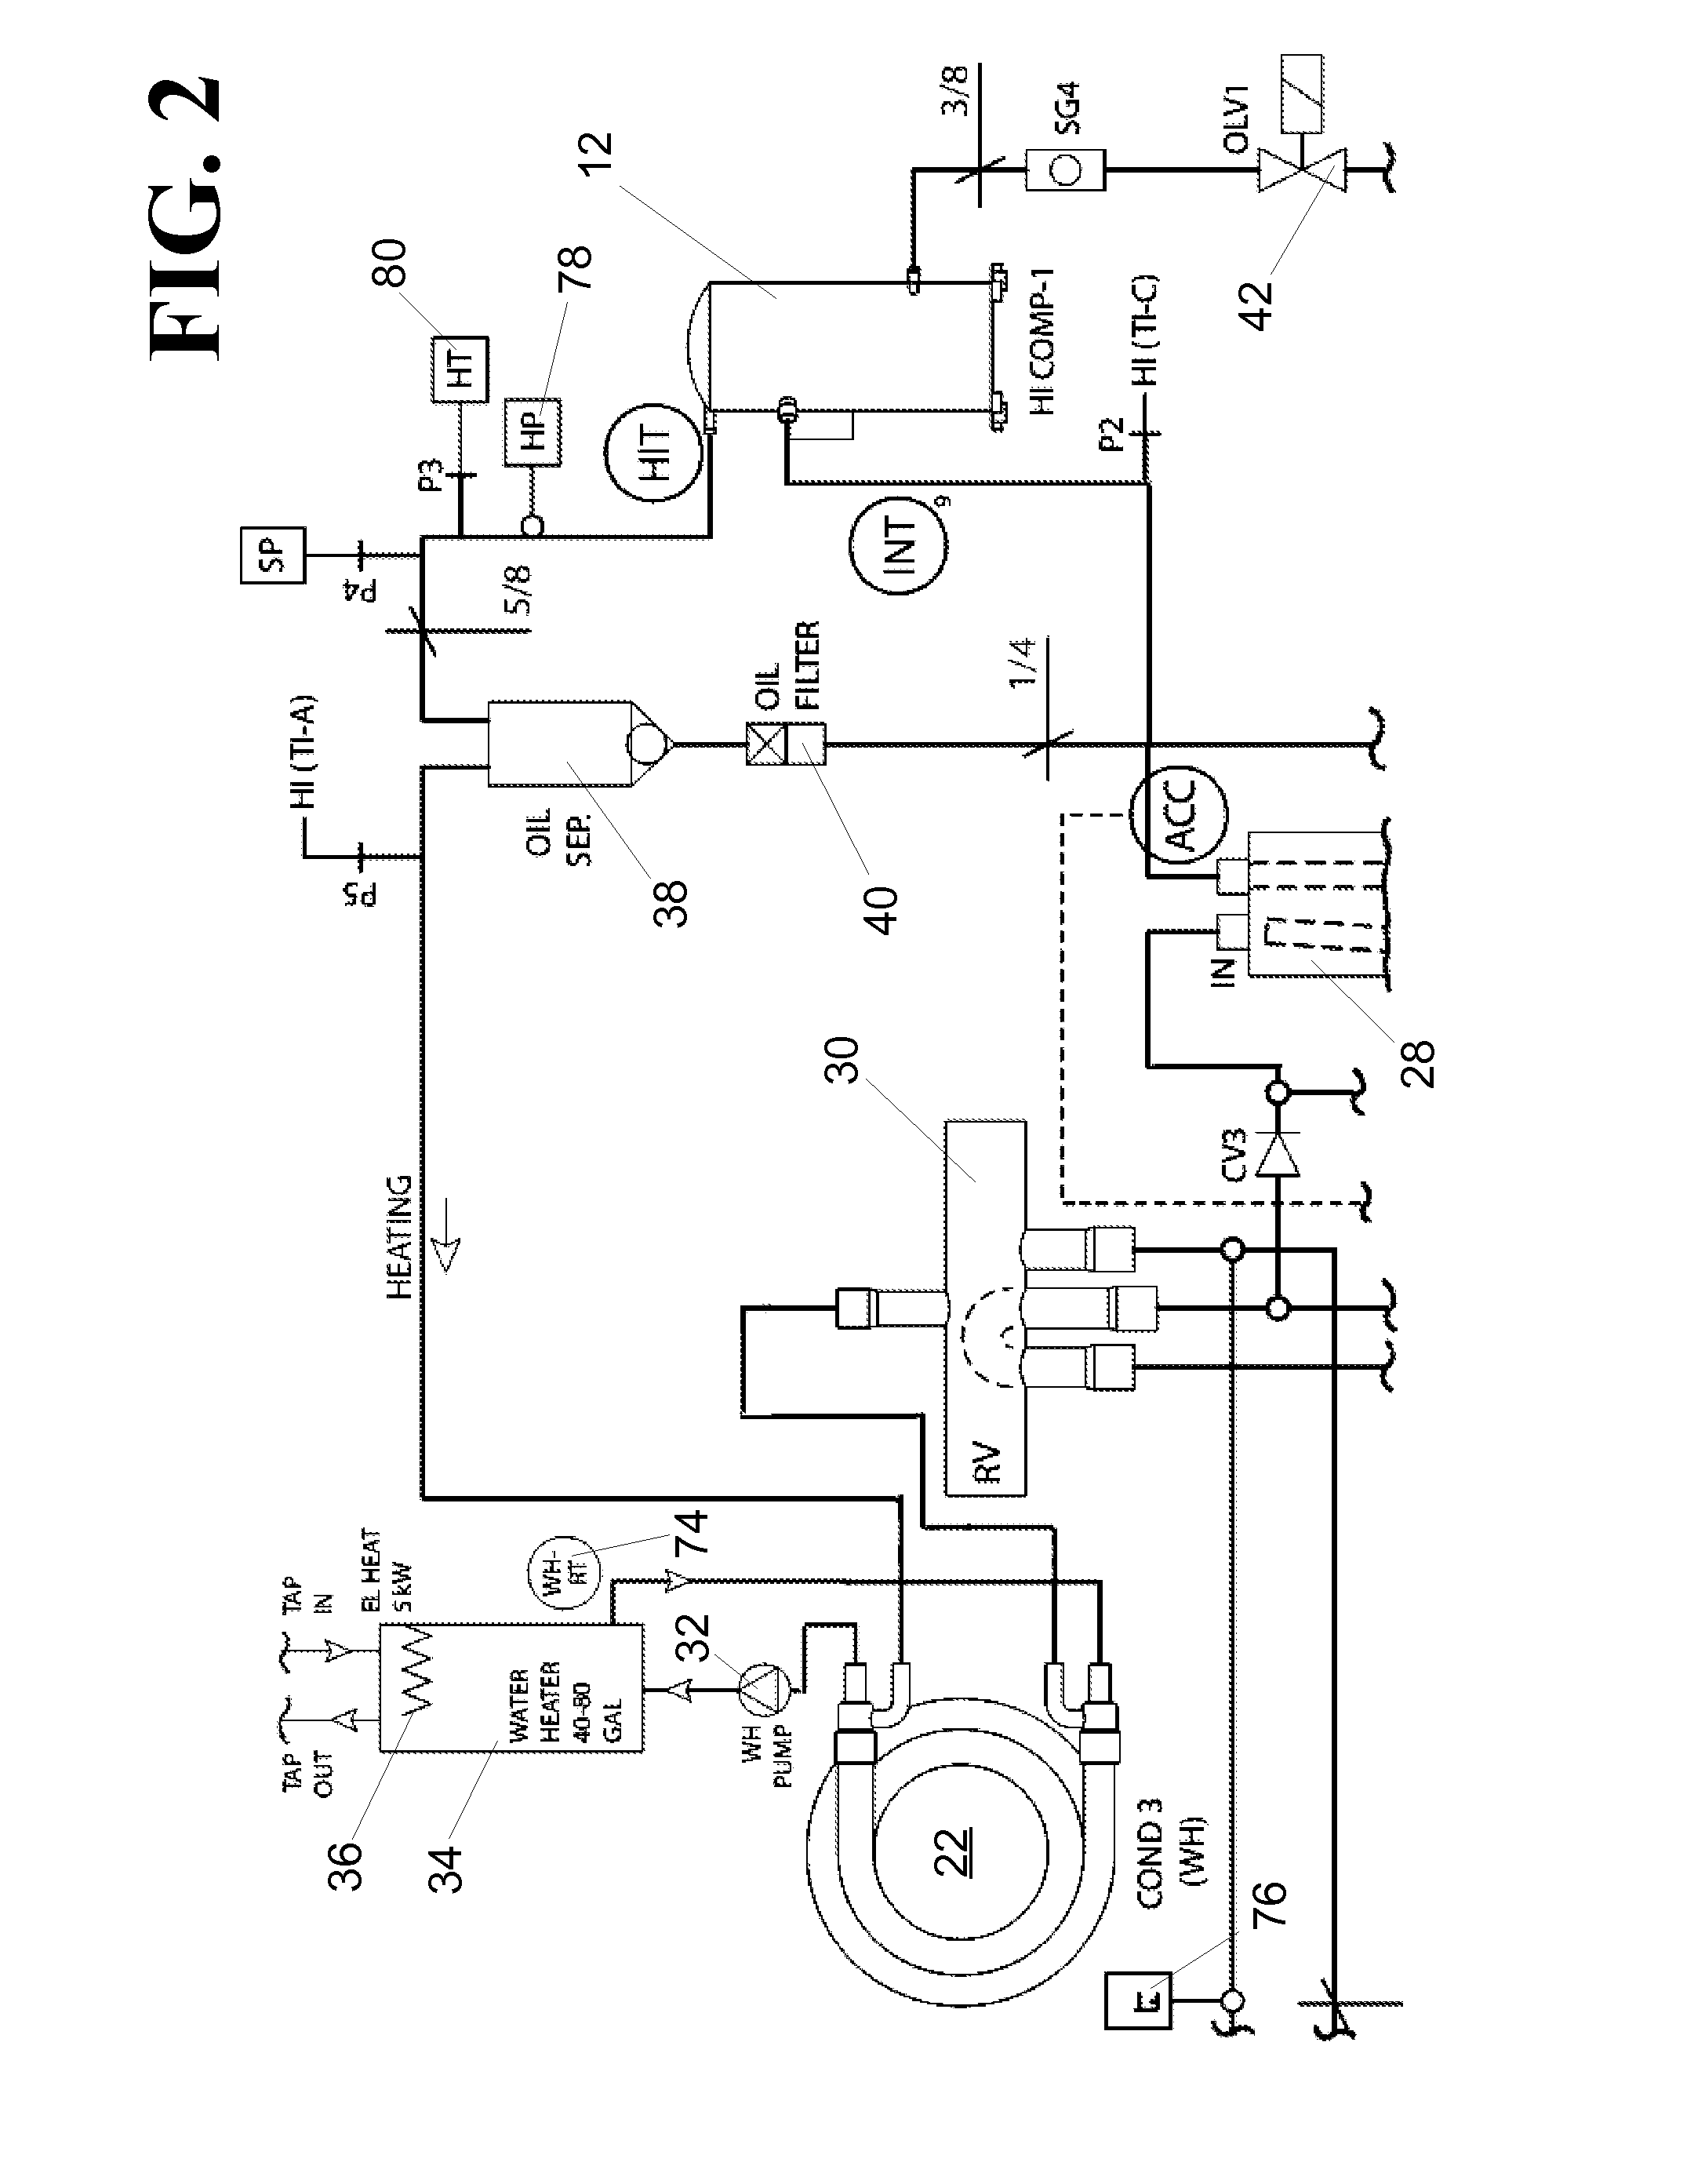 Heat pump system with extended run time boost compressor